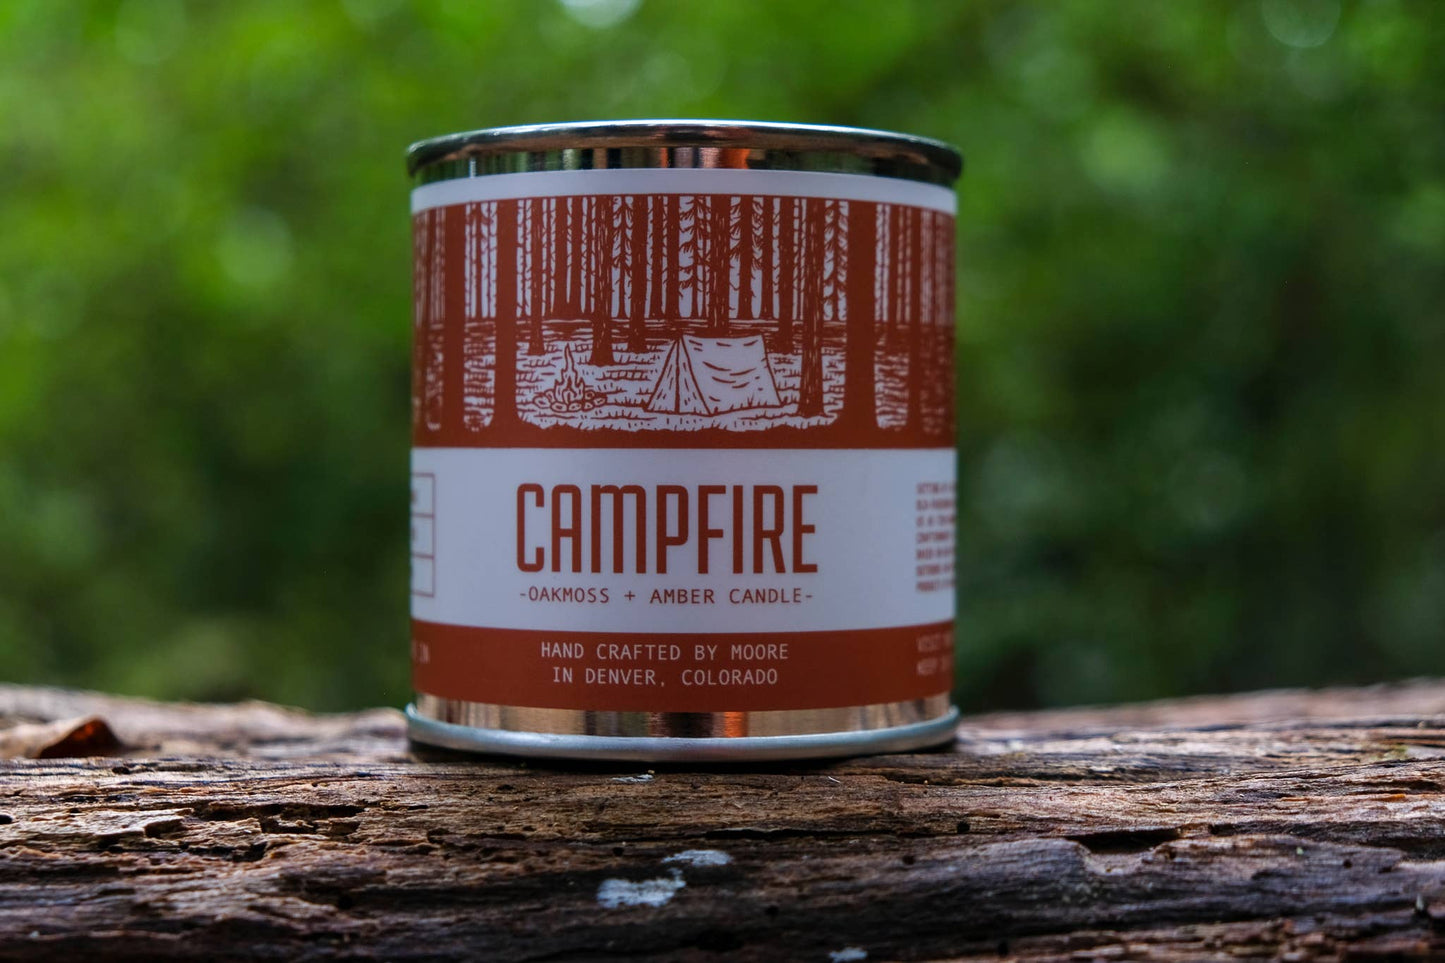 Campfire Candle | Pint